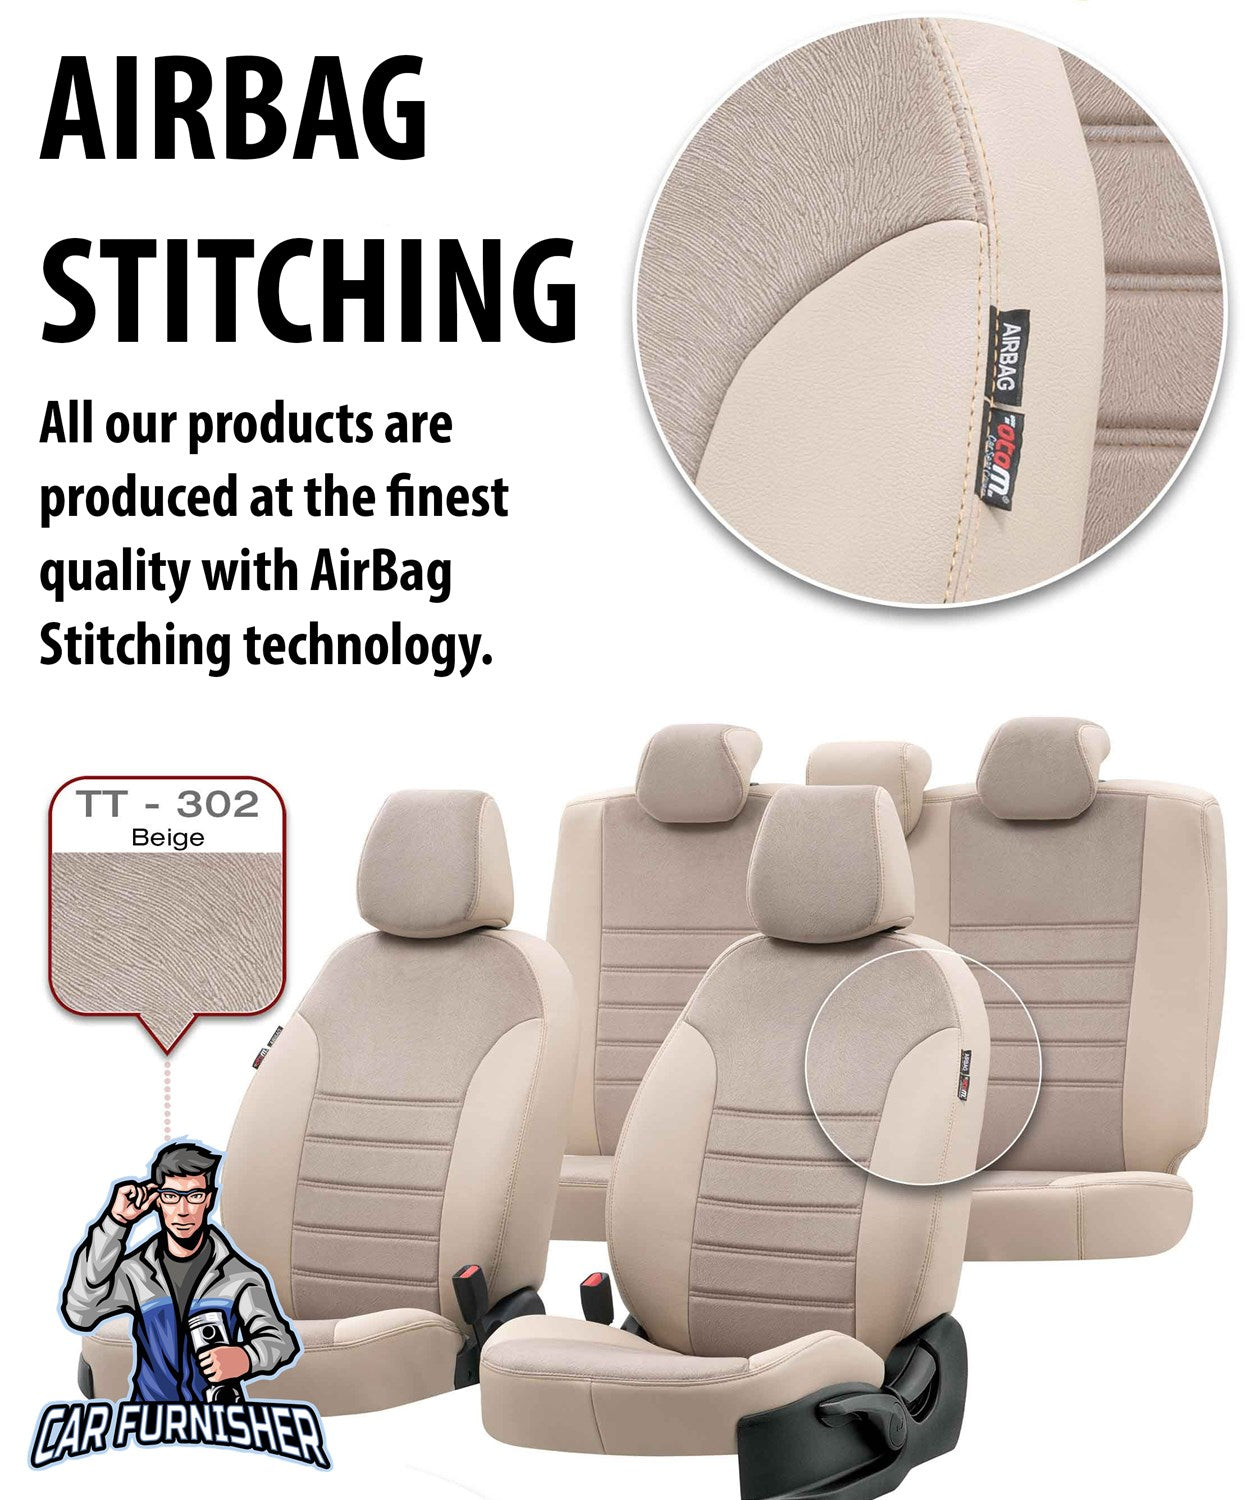 Fiat Scudo Seat Covers London Foal Feather Design Ivory Leather & Foal Feather